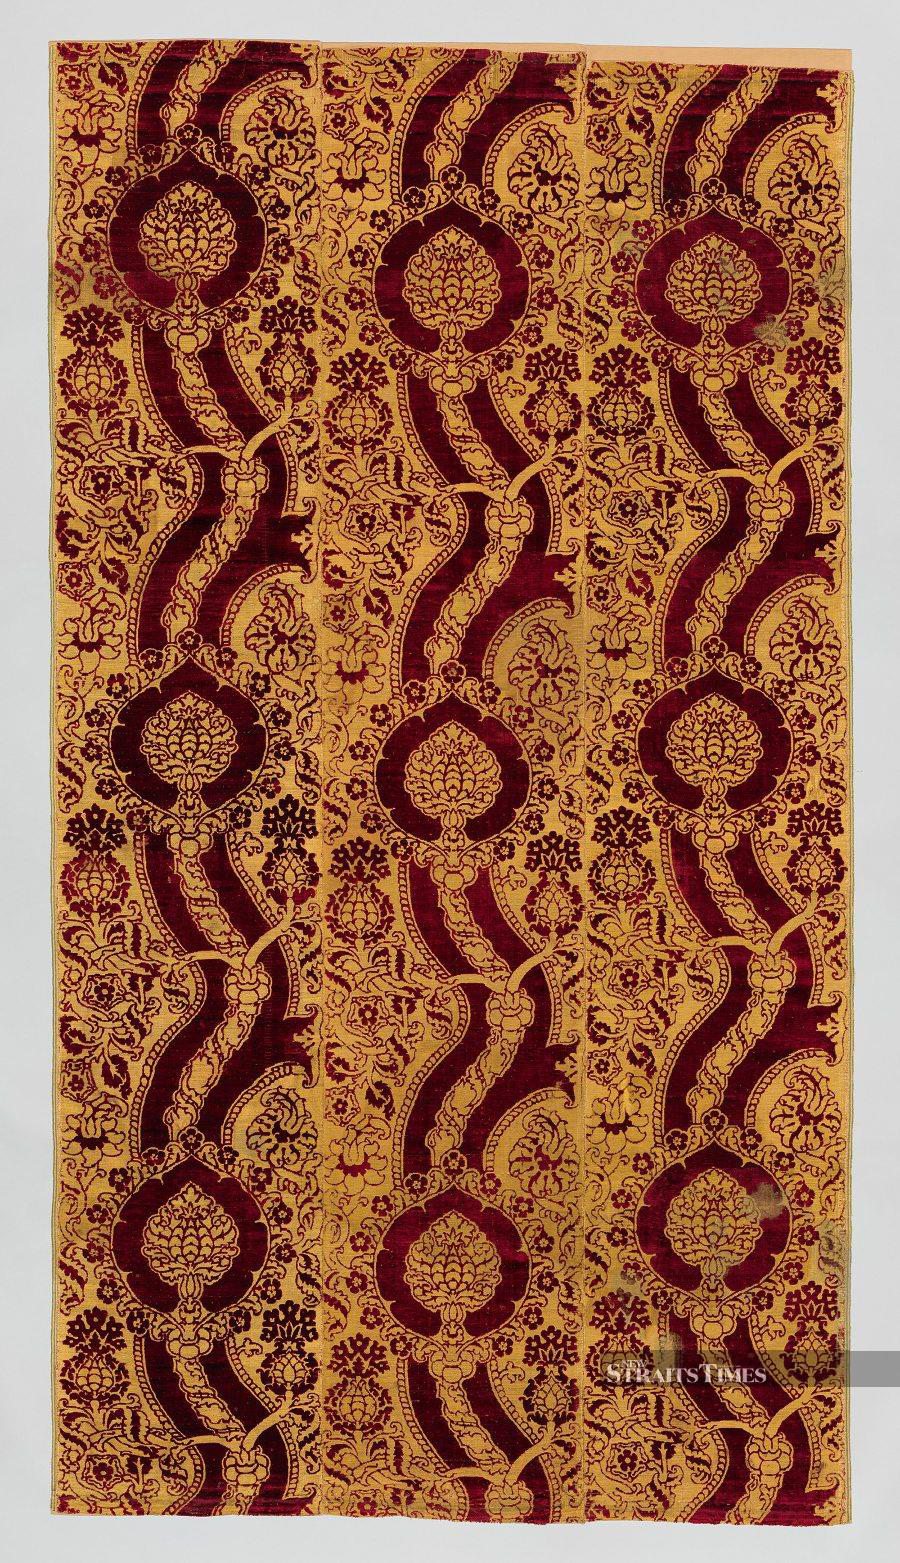  A furnishing silk from Italy, showing strong Ottoman influence. The Metropolitan Museum of Art, New York, NY (67.55.101)